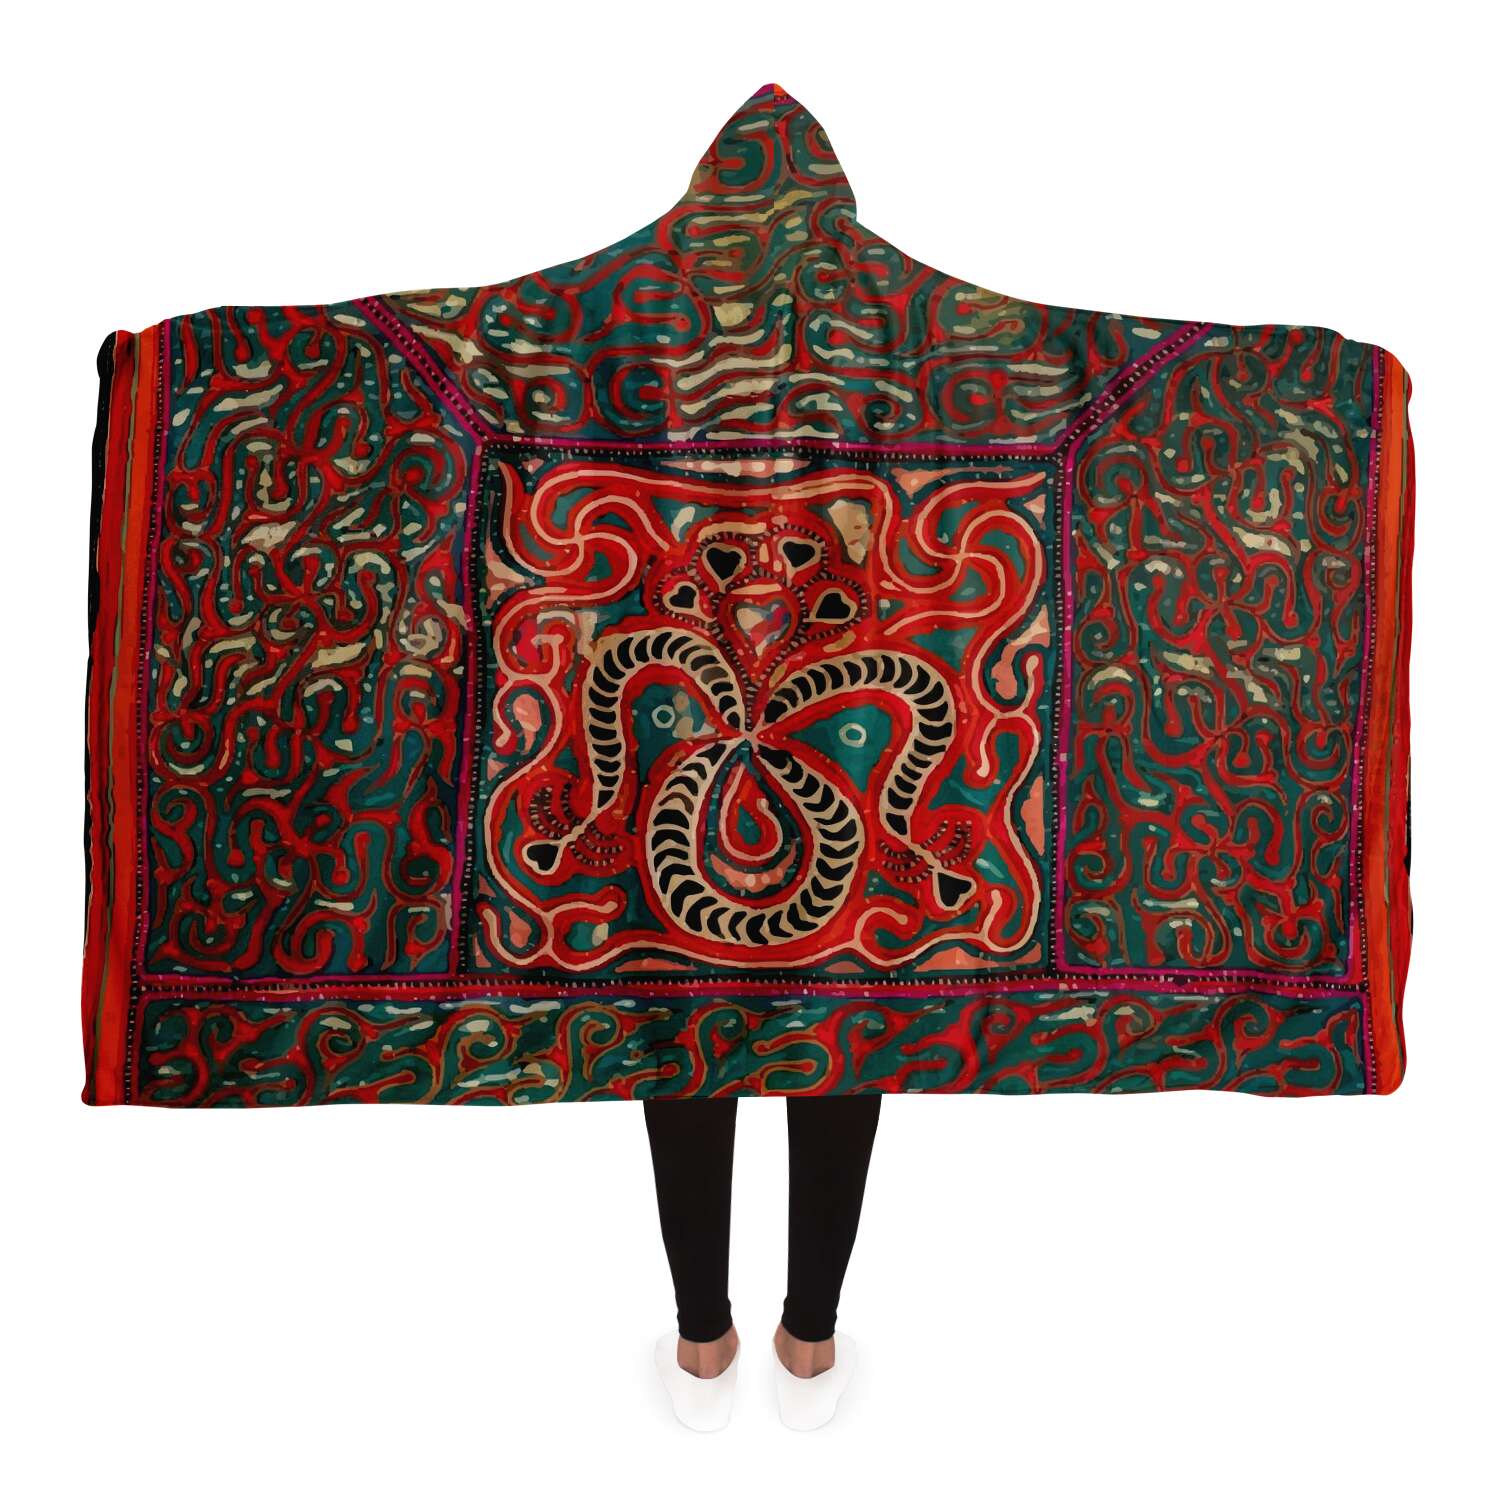 Hooded Blanket - AOP Adult / Premium Sherpa Hooded Blanket, Miao Culture Antique, Traditional Design